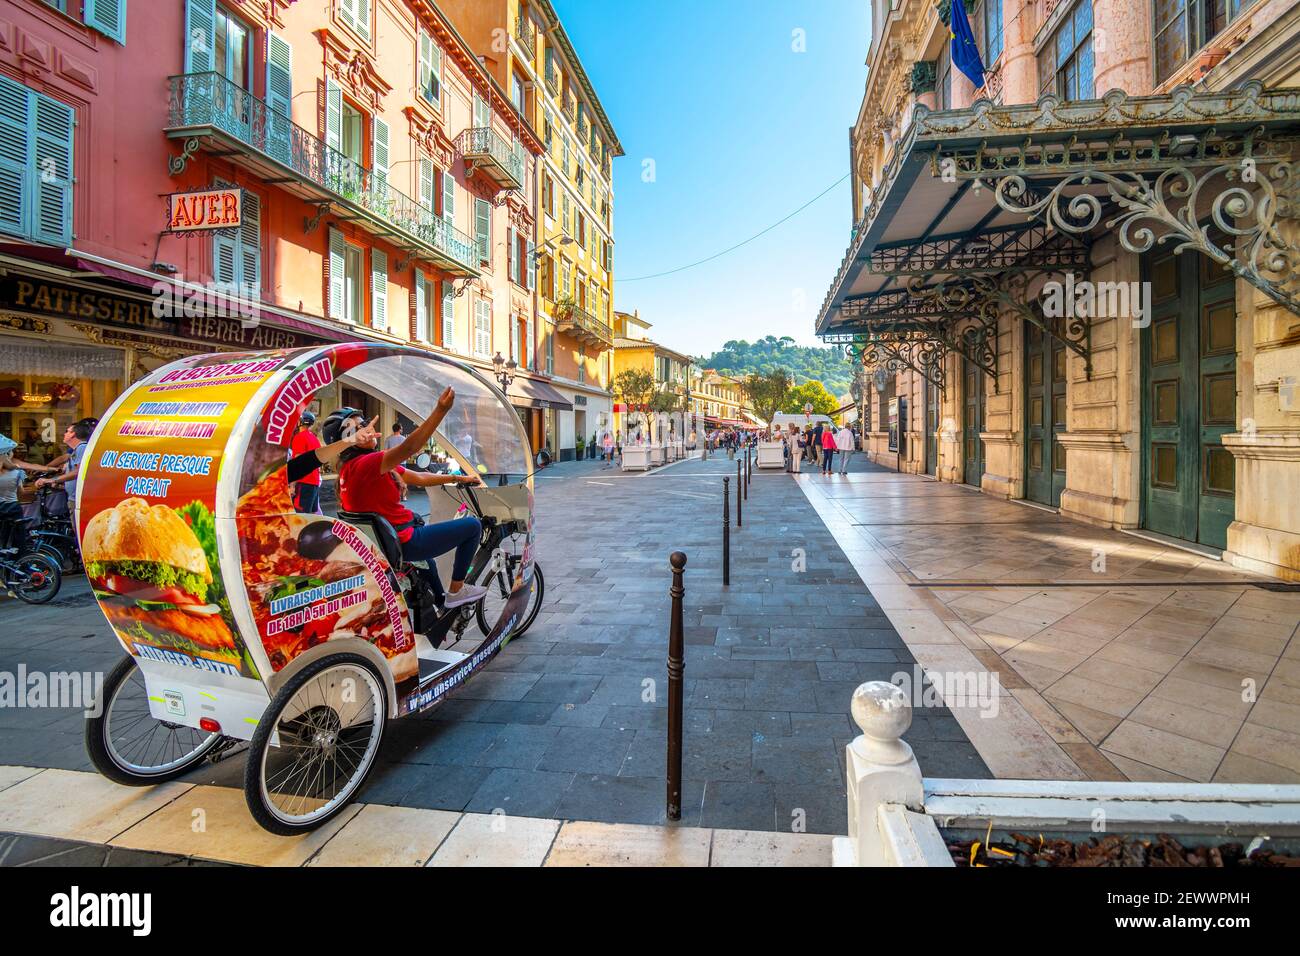 A female cyclist taxi driver guides tourists on a 3 wheel rickshaw bicycle through the Old City of Nice, France on the French Riviera. Stock Photo